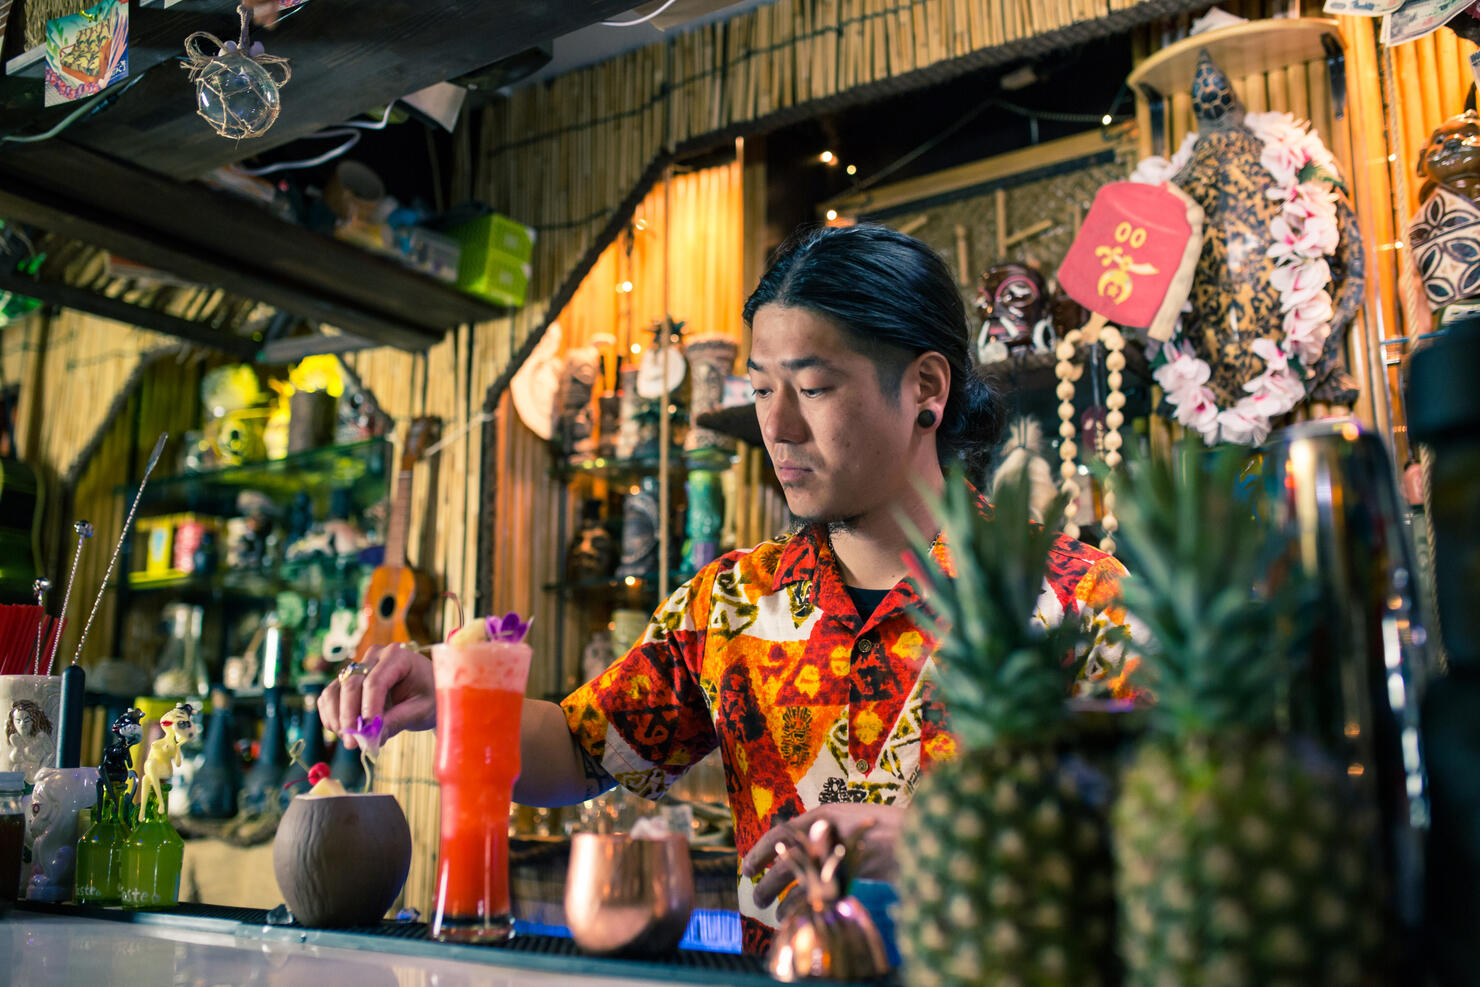 Bartender mixing cocktails and making drinks in a tropical themed restaurant or bar